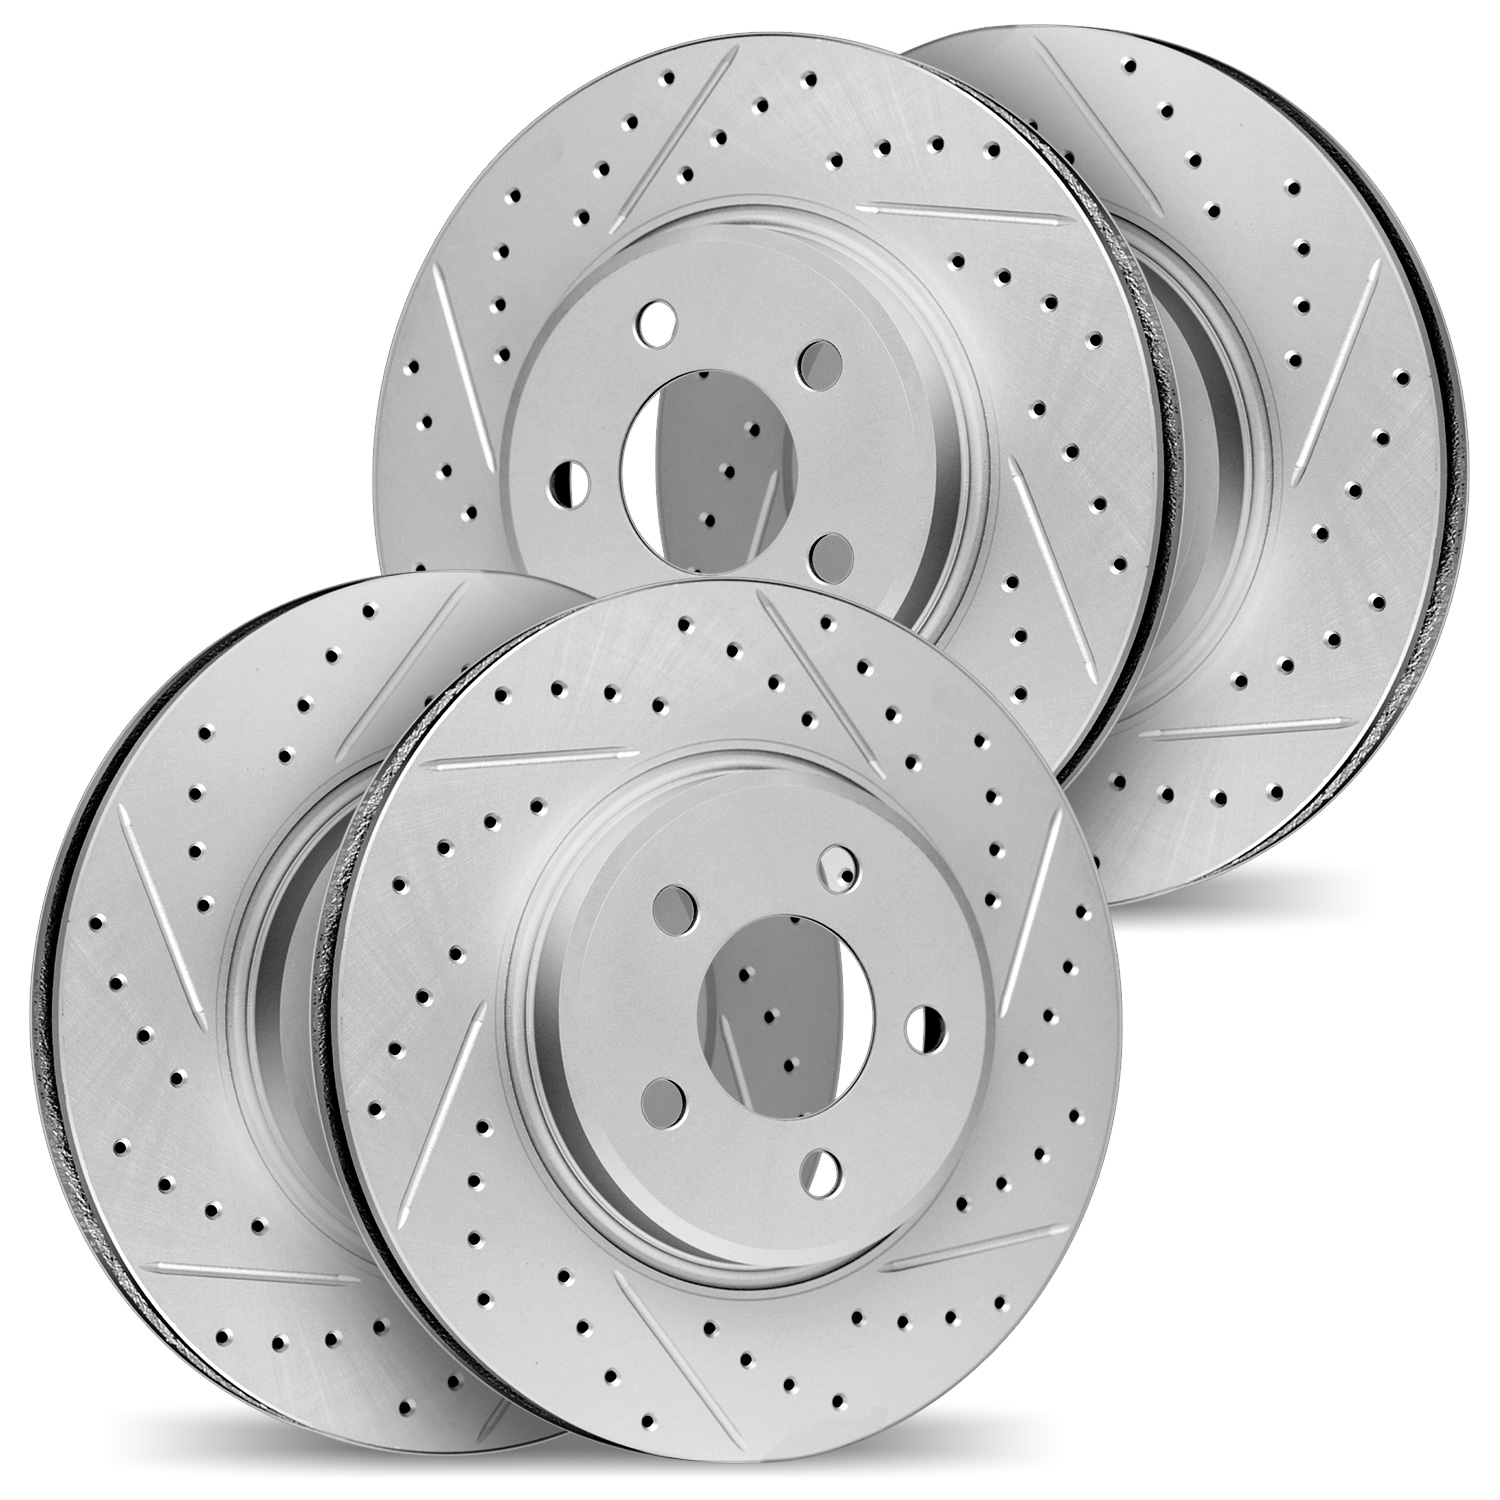 2004-03026 Geoperformance Drilled/Slotted Brake Rotors, 2010-2016 Kia/Hyundai/Genesis, Position: Front and Rear